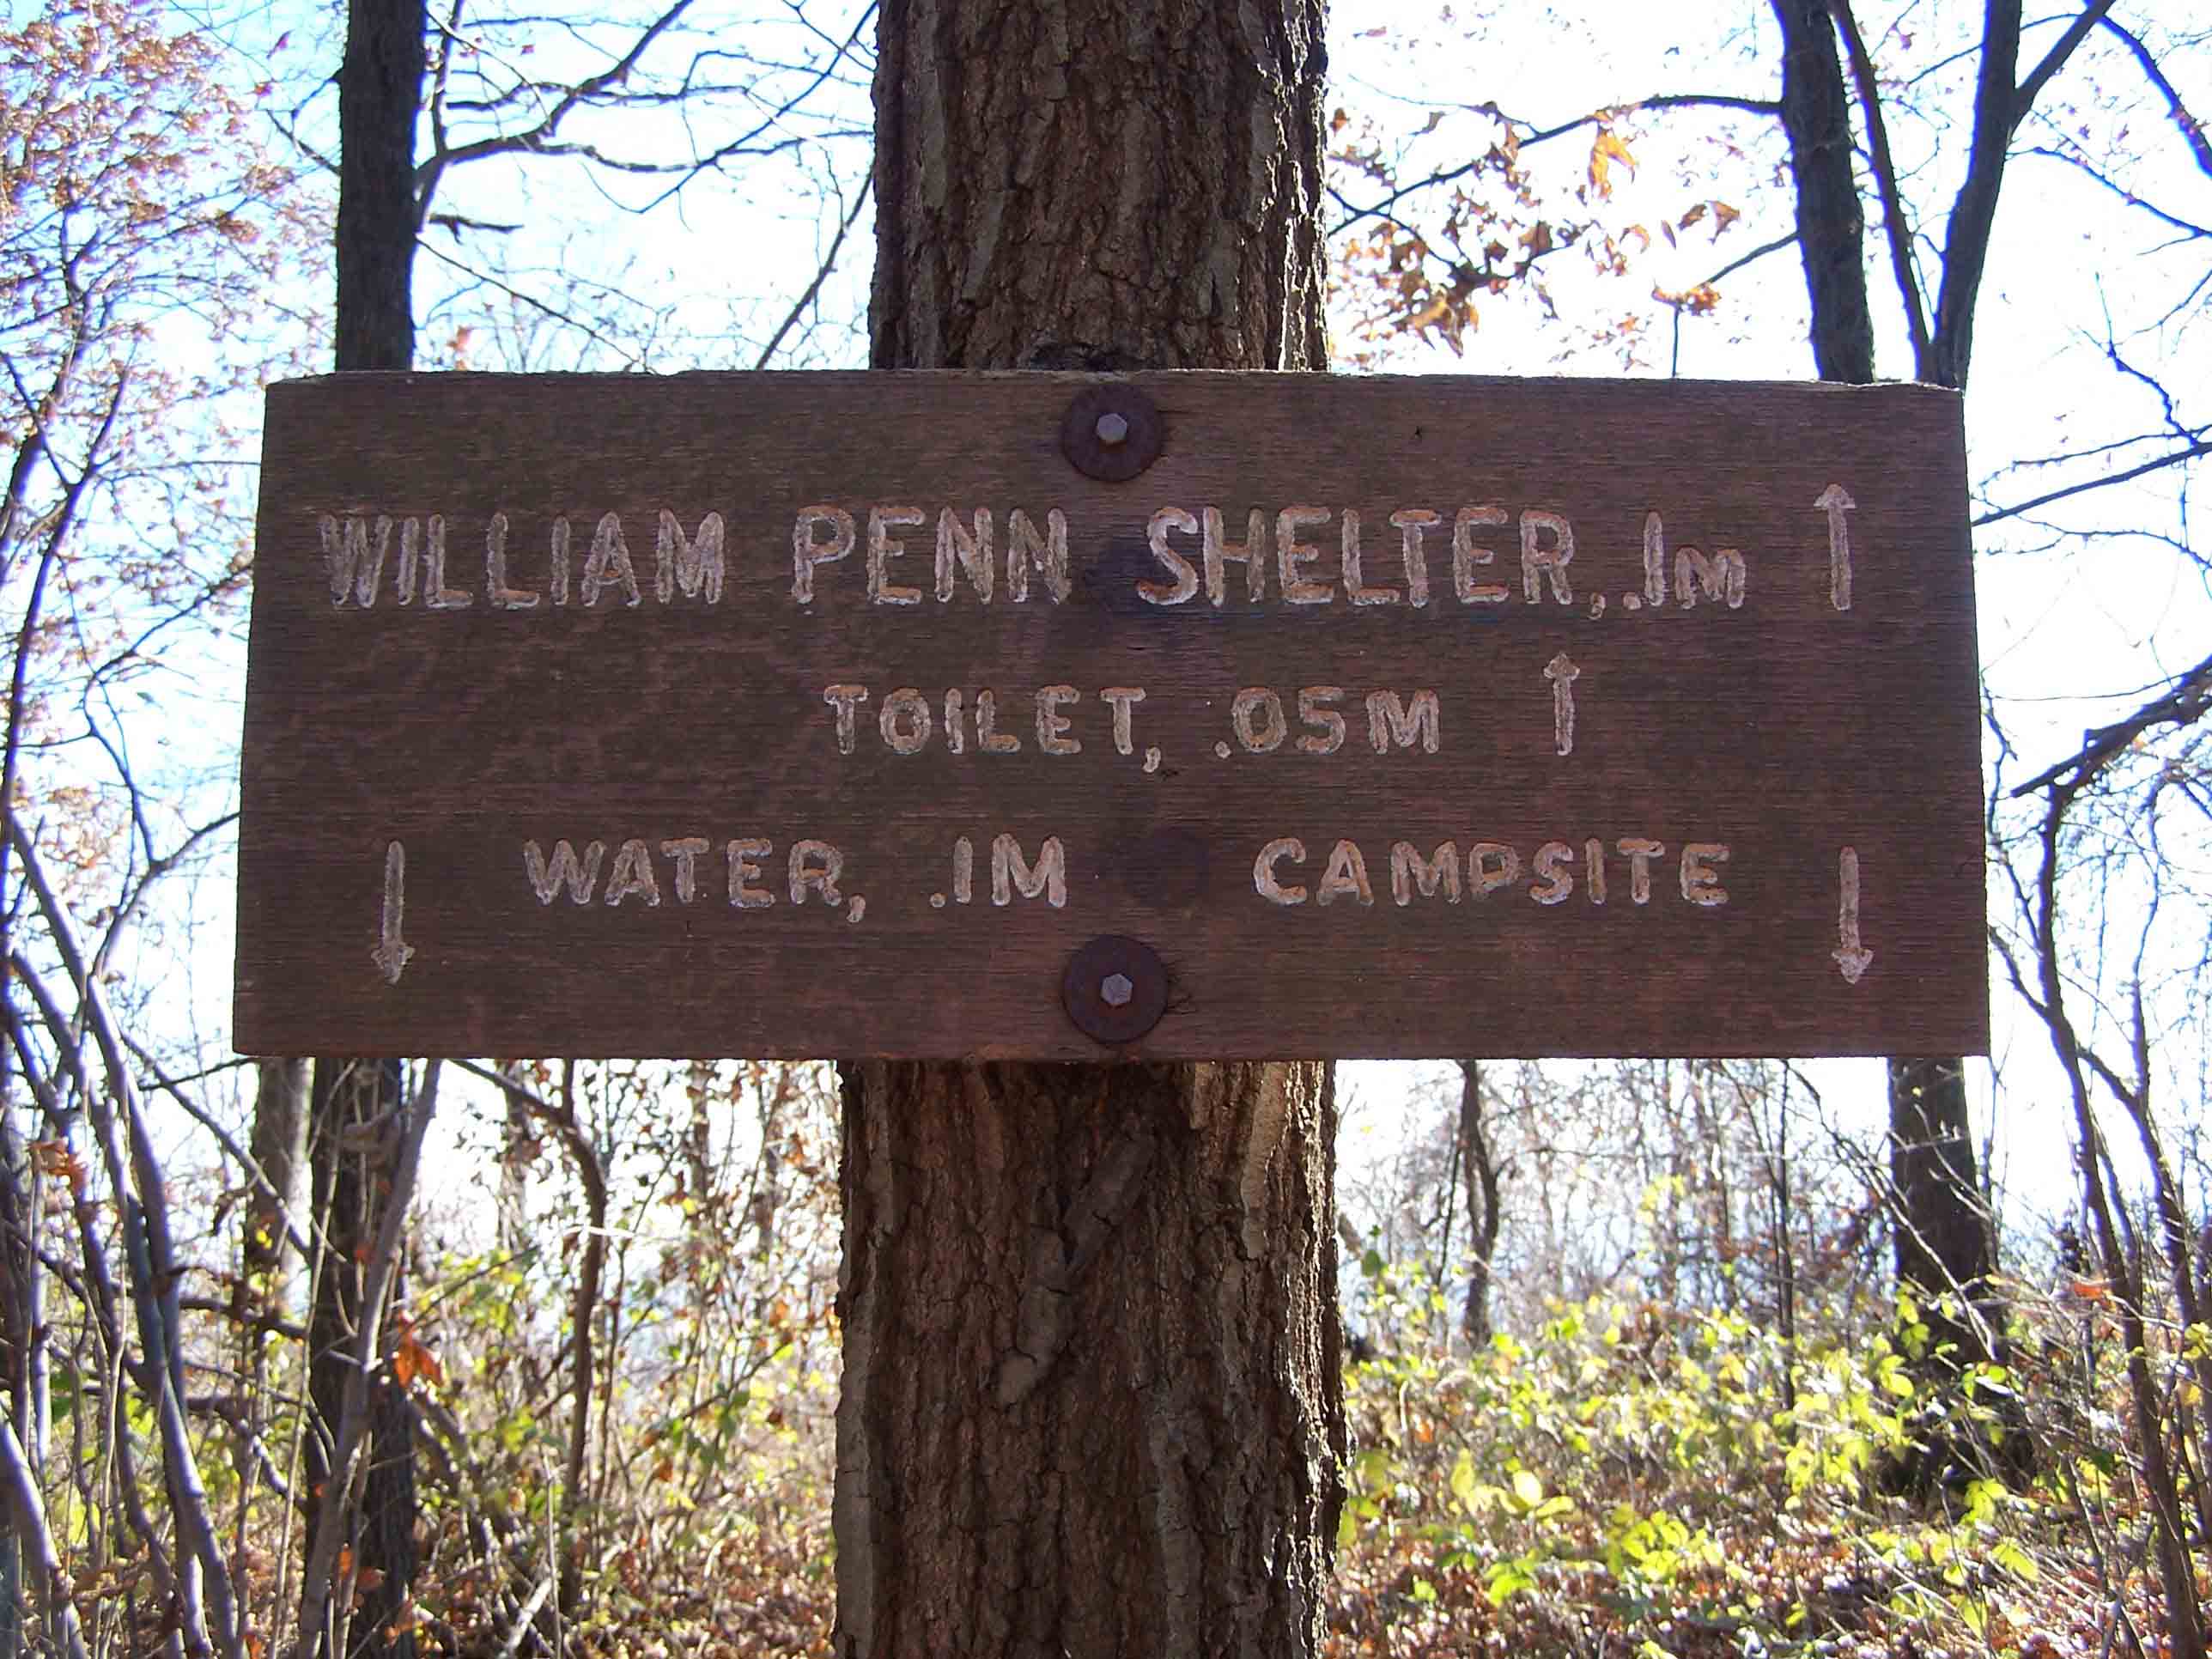 mm 13.4 - Sign for William Penn Shelter. Courtesy at@rohland.org